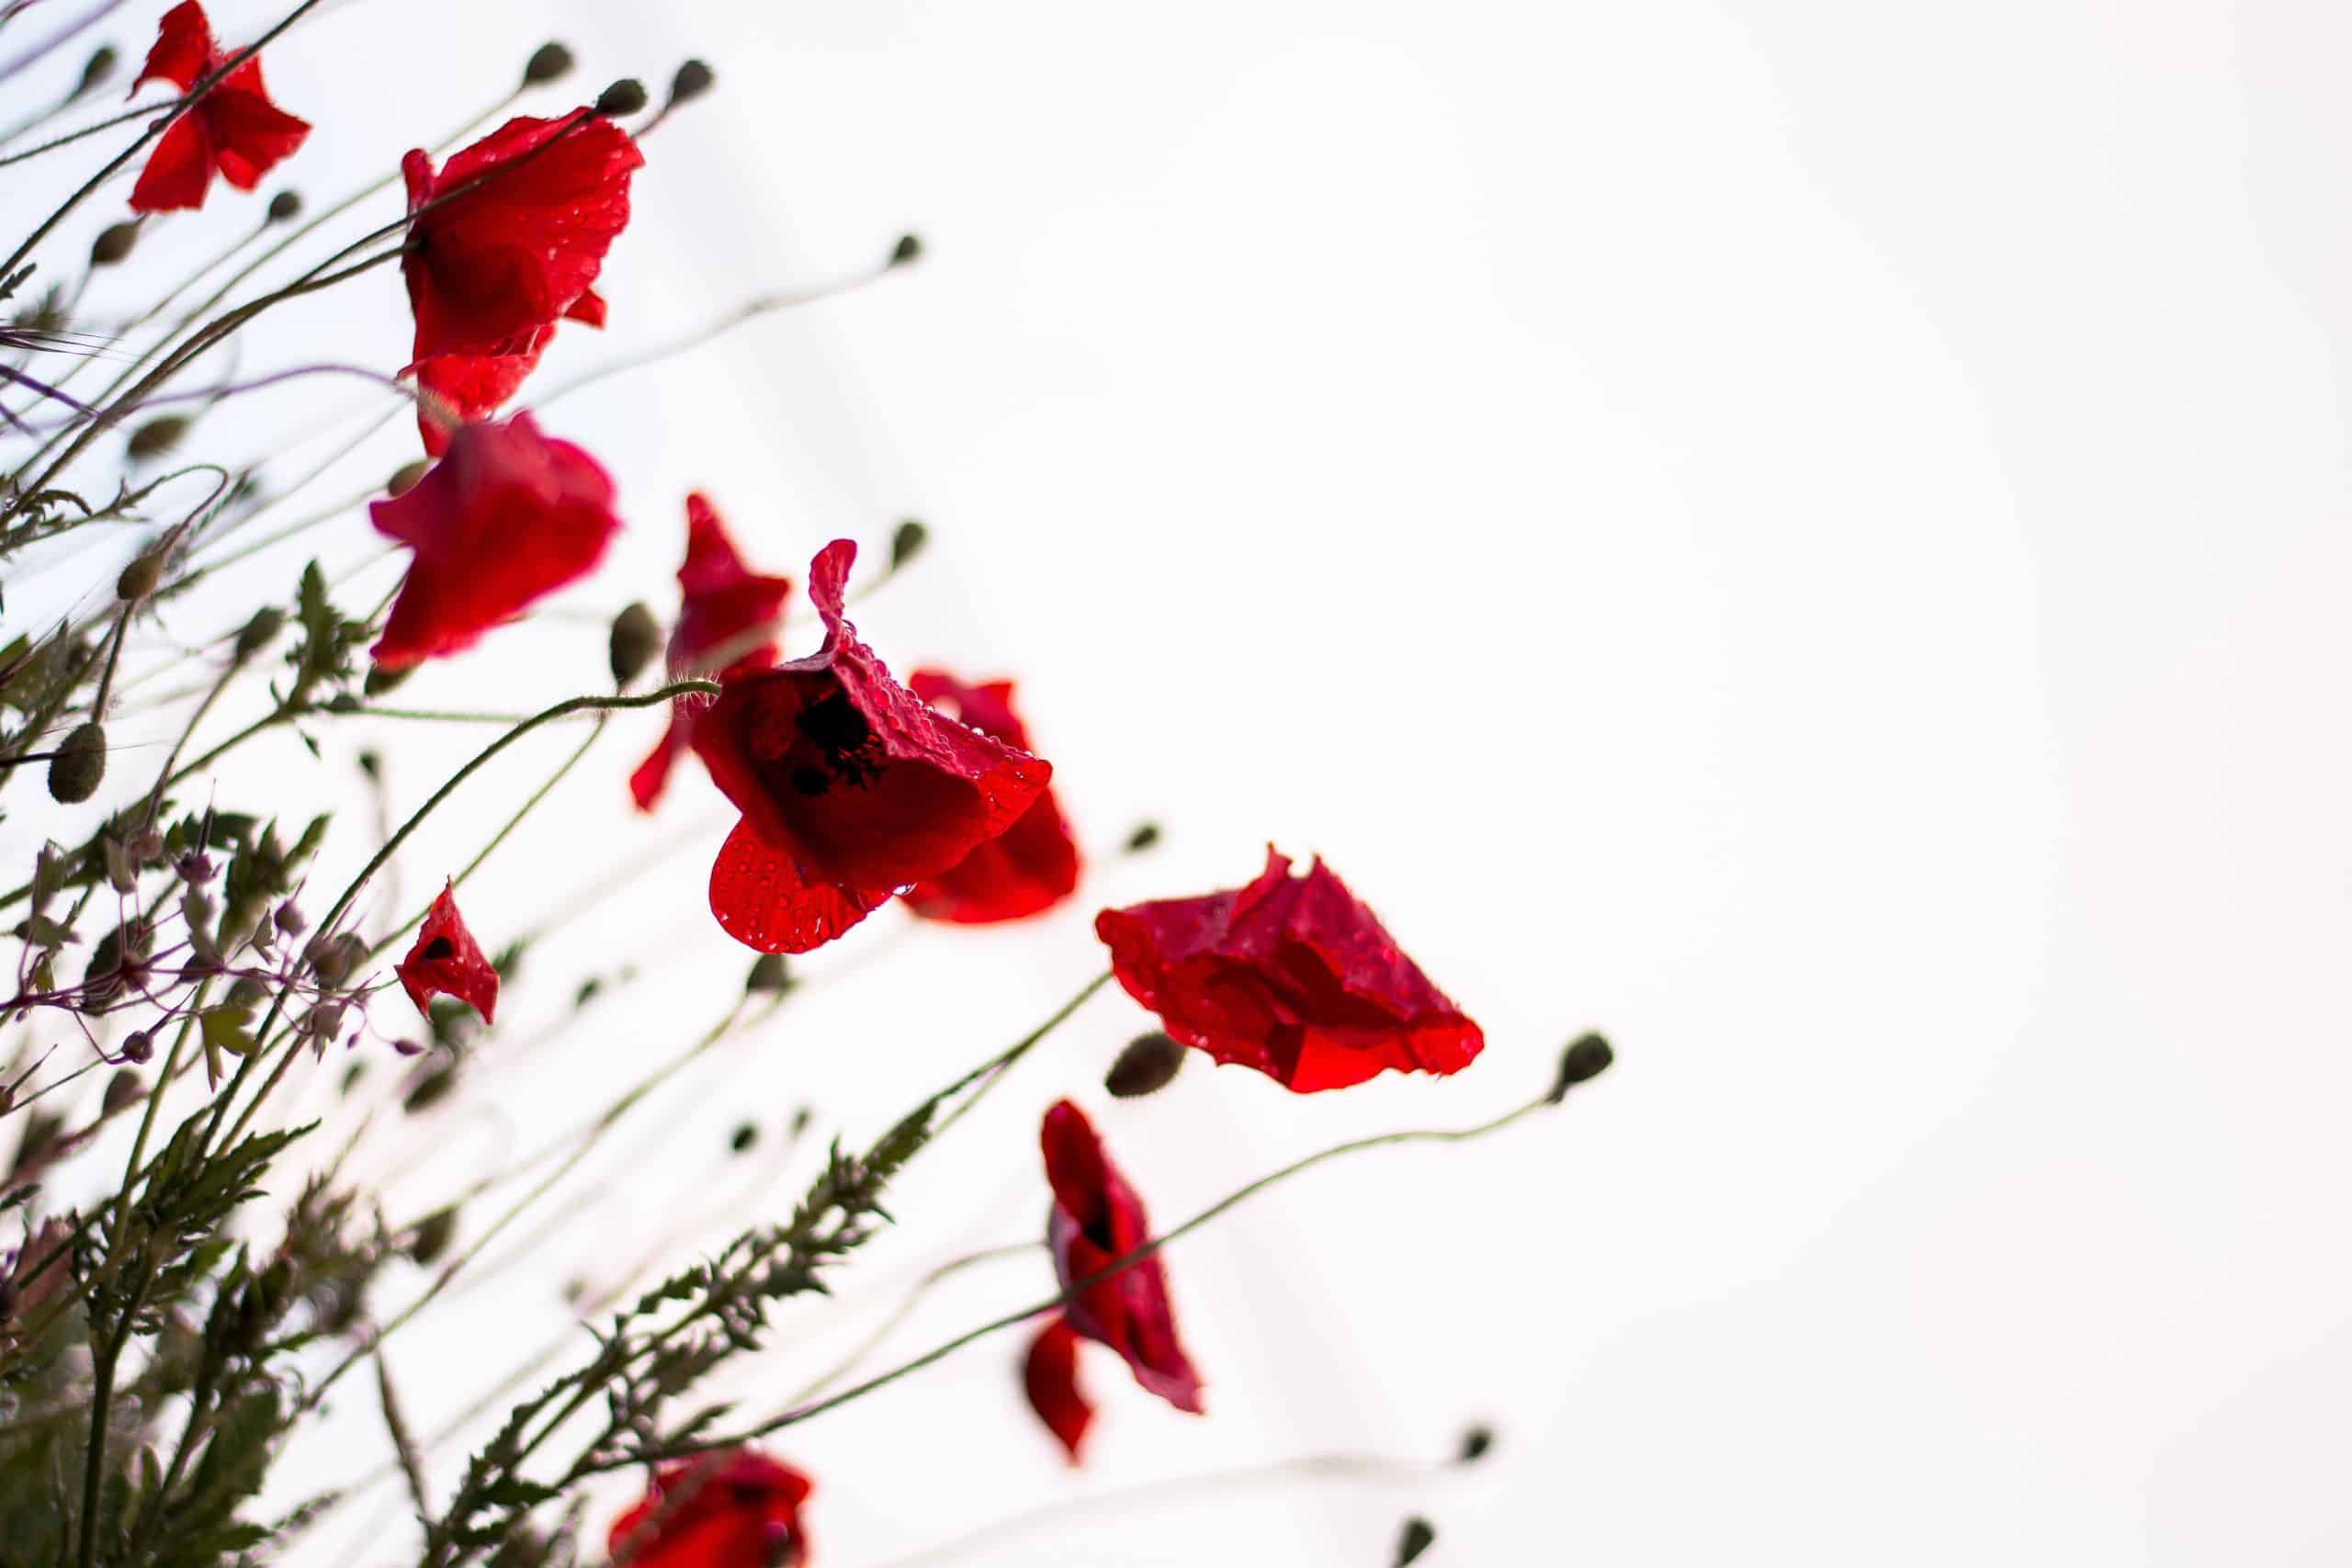 poppies in the breeze | Photo by Monica Galentino on Unsplash